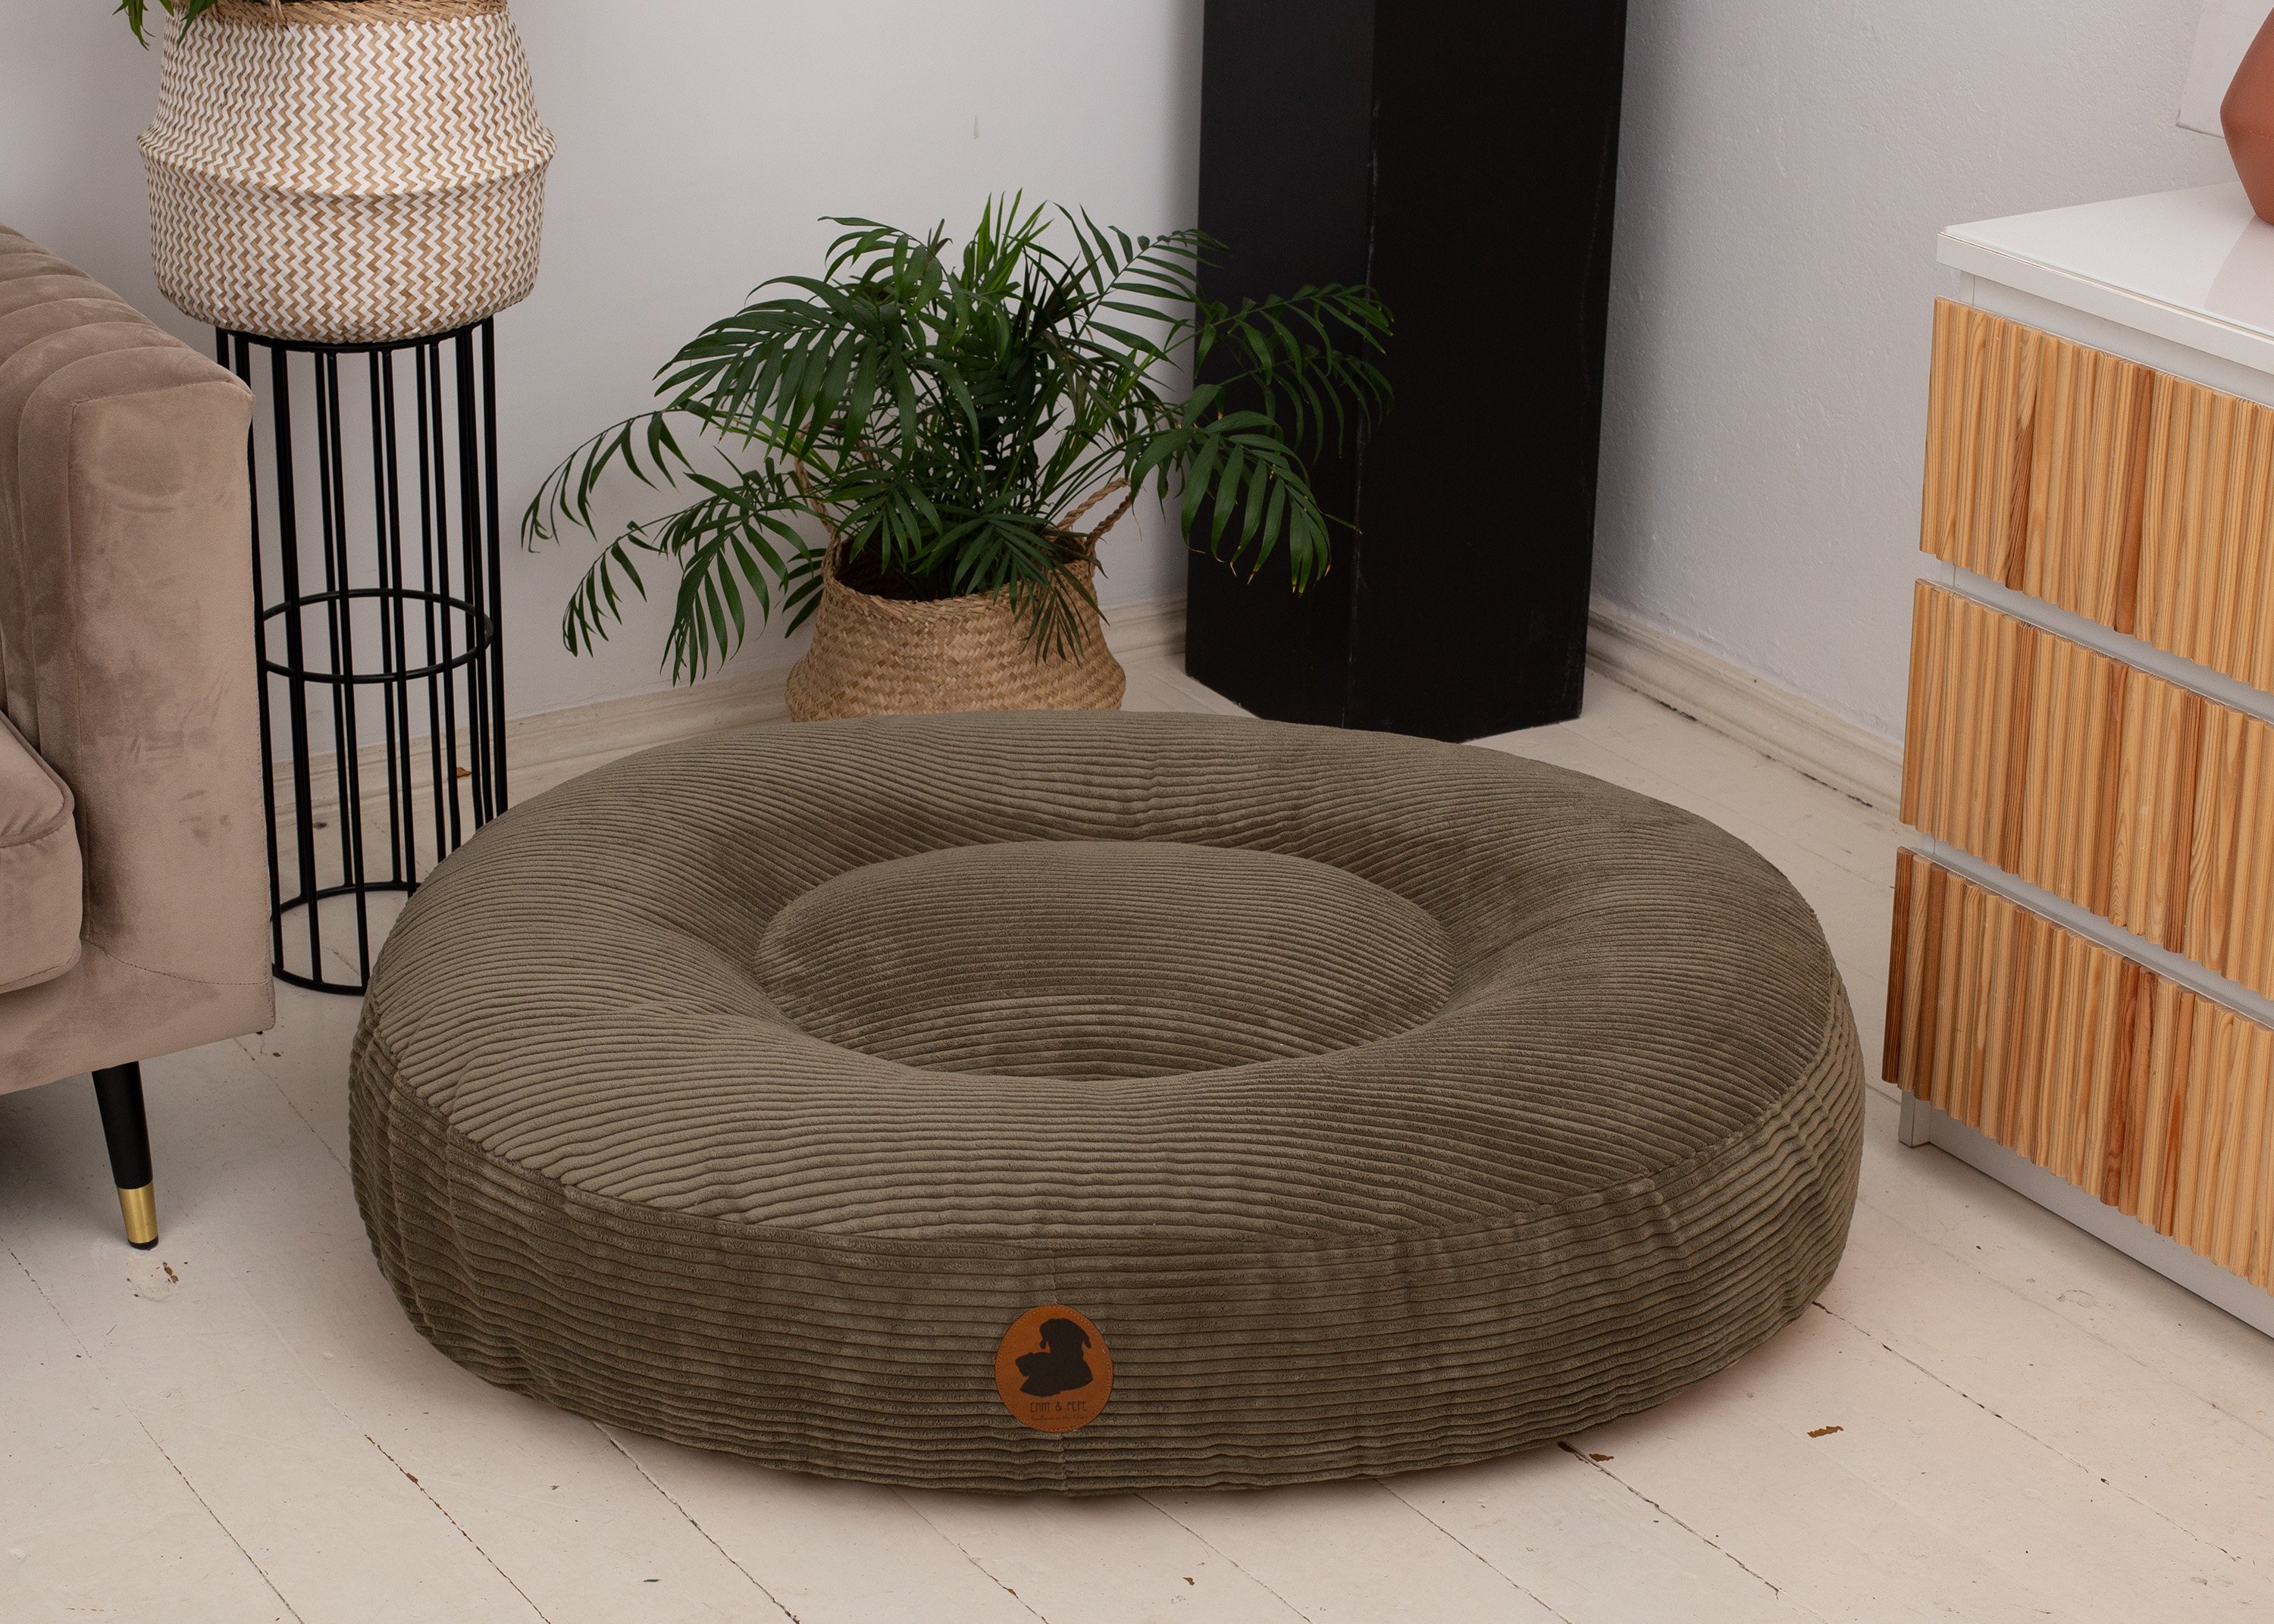 Wau-Bed Cord Olive Oval-S (80x60cm)